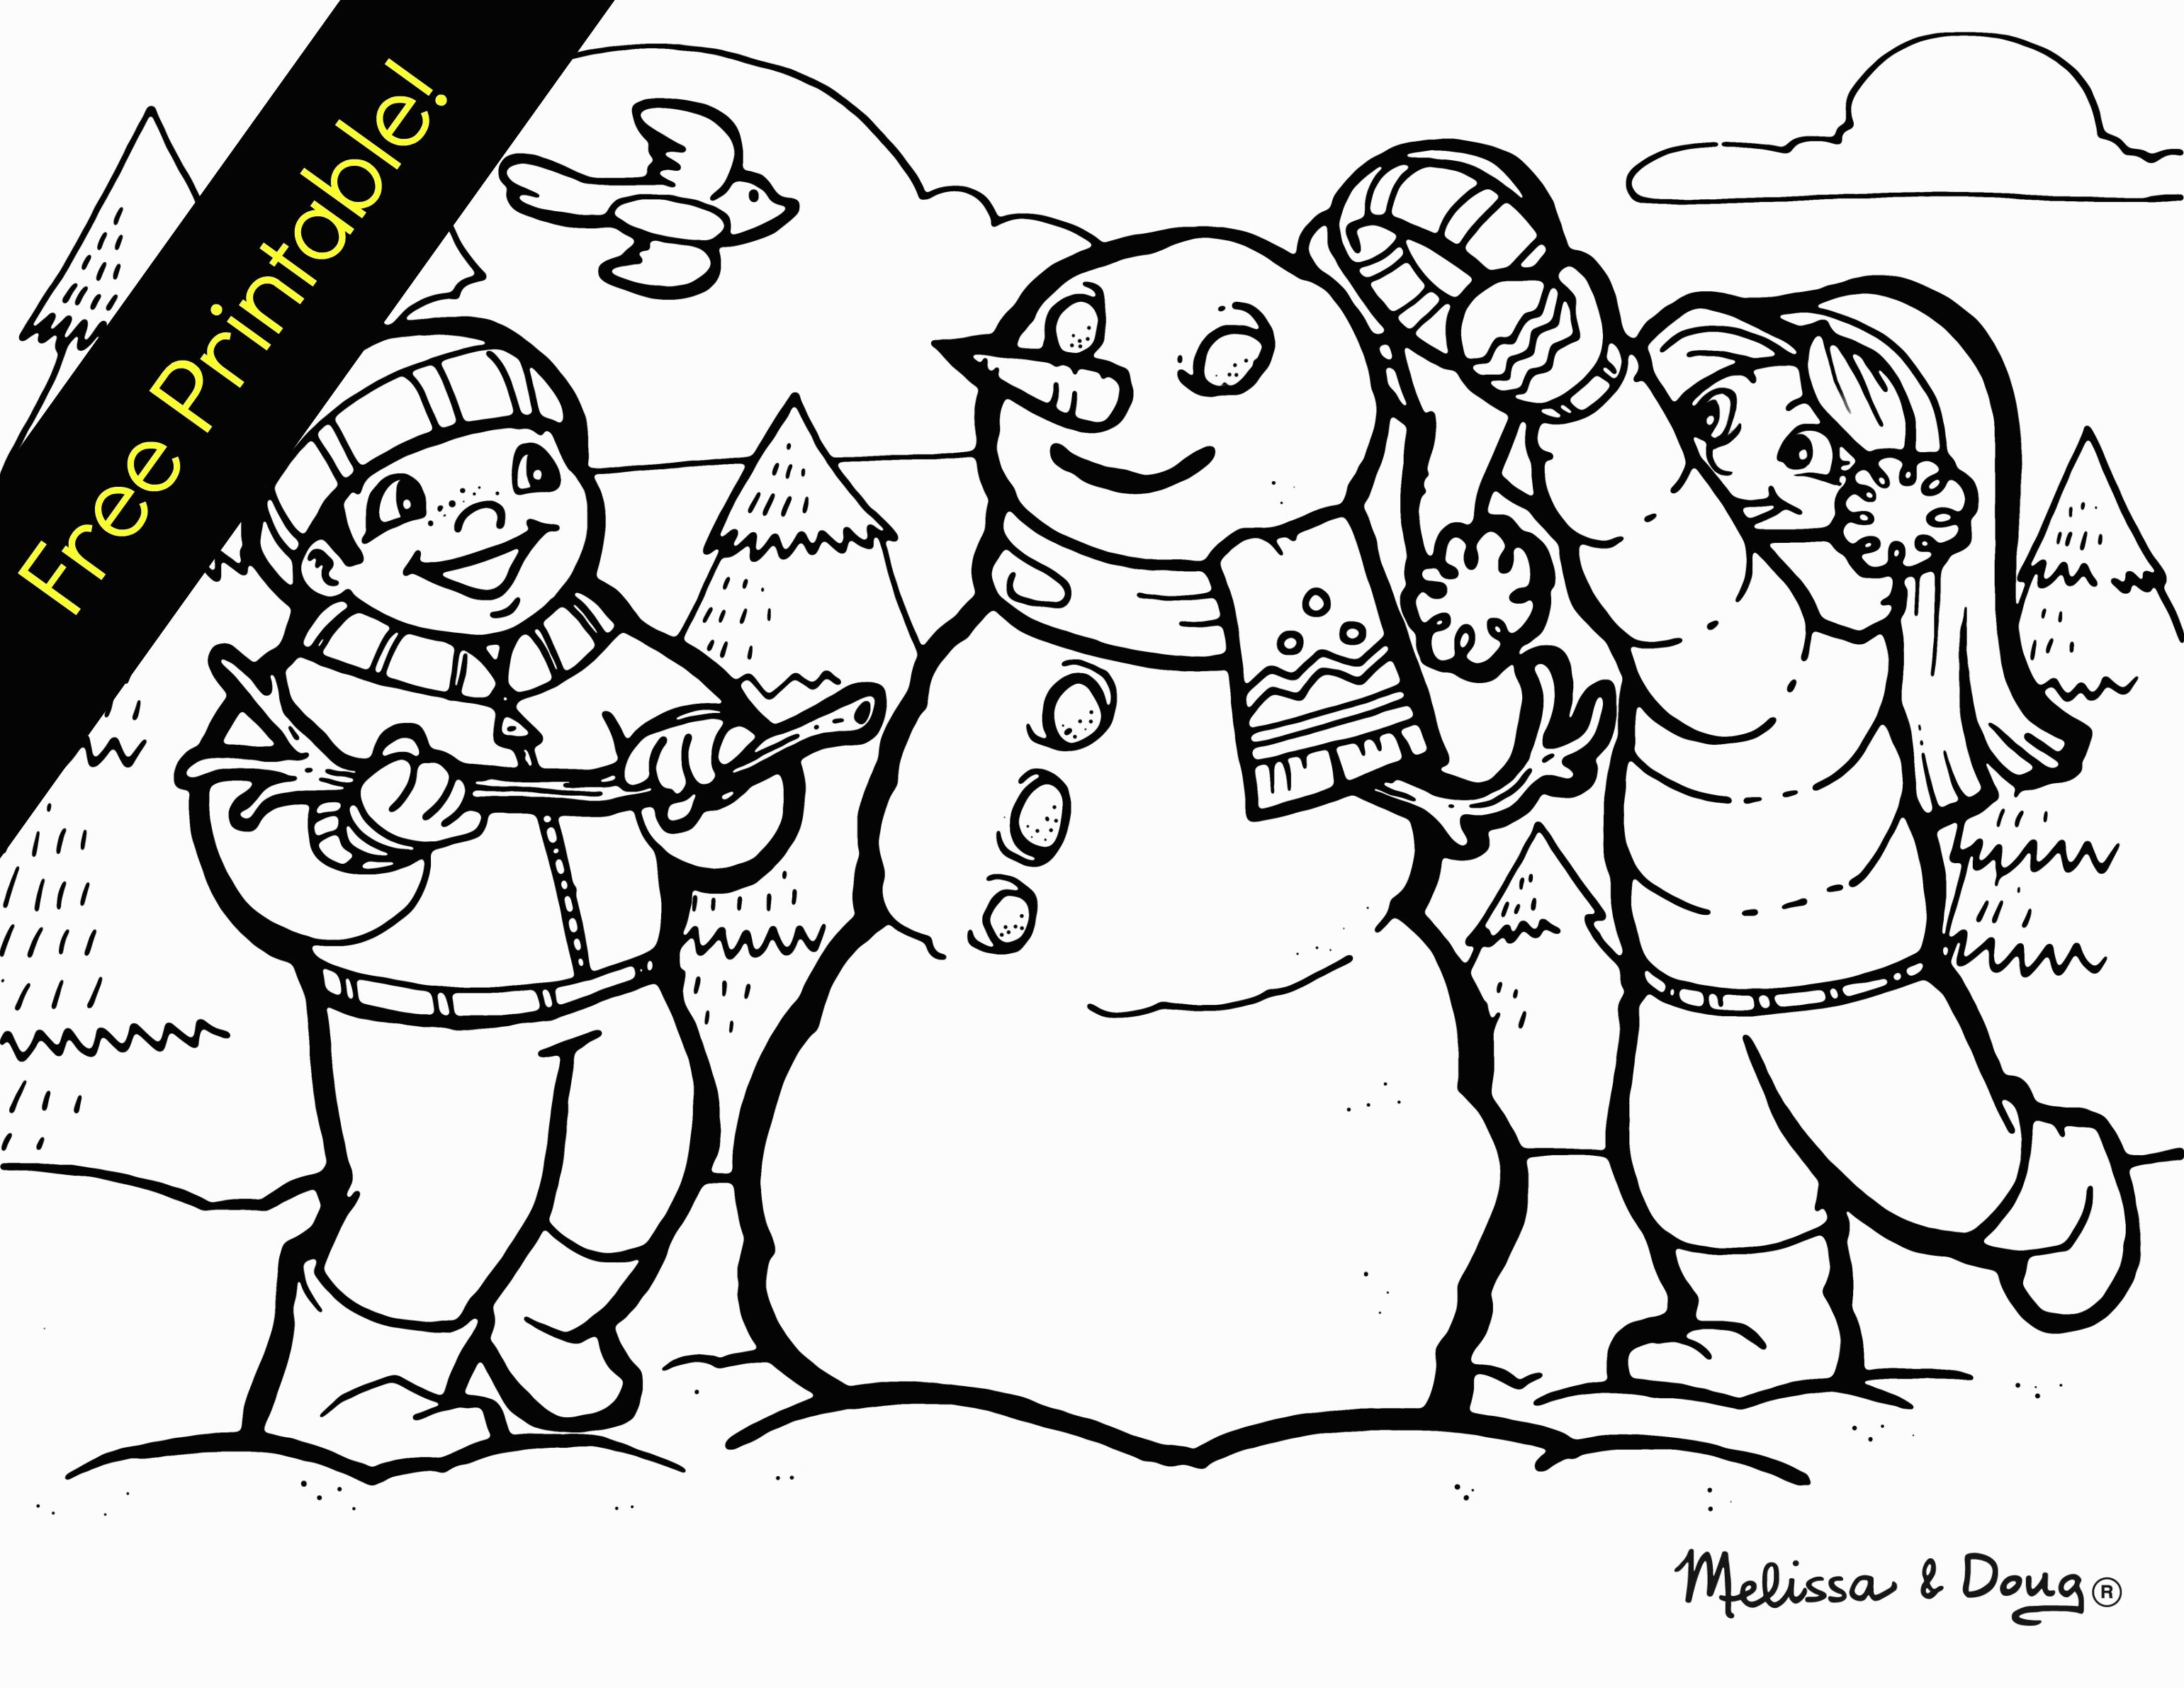 Train Free Coloring Pages Of Kids Playing In The Snow - Widetheme